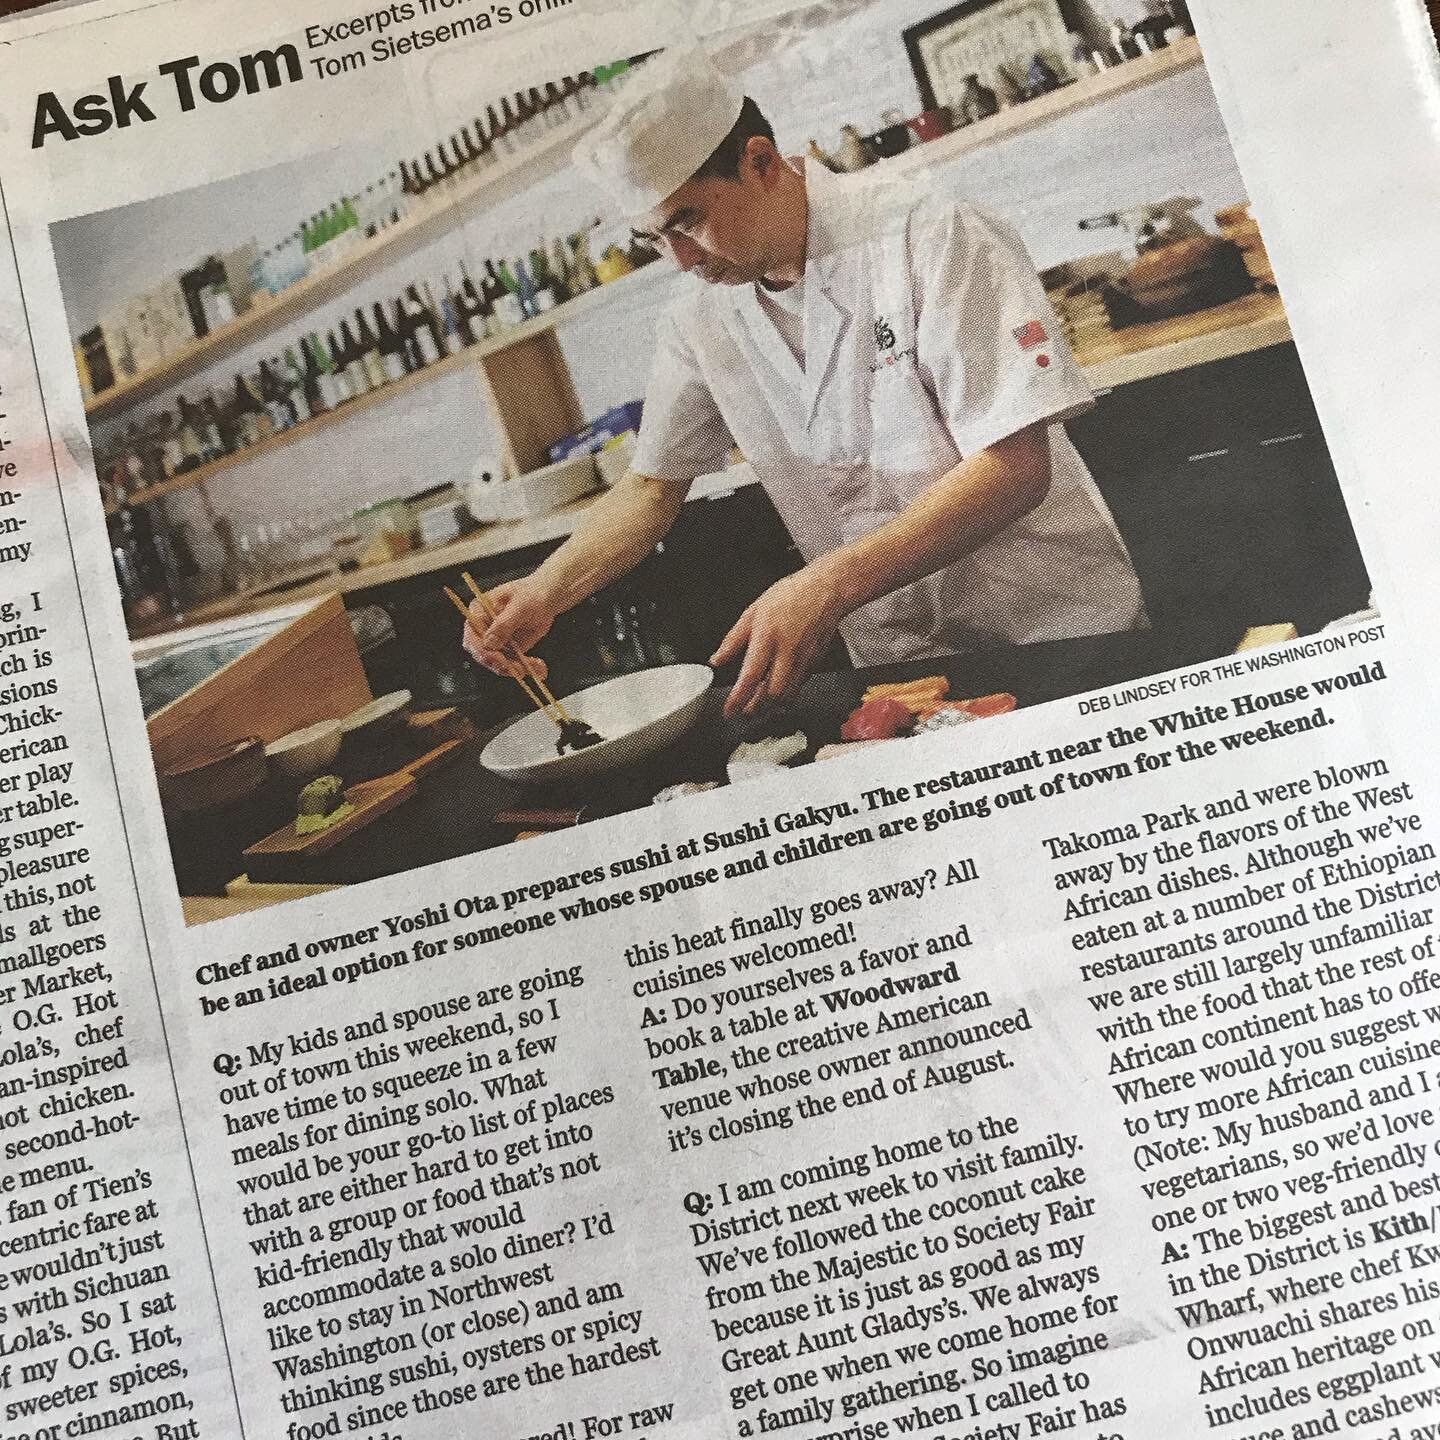 Thank you for your recommendation @tomsietsema @washingtonpost @deblindsey